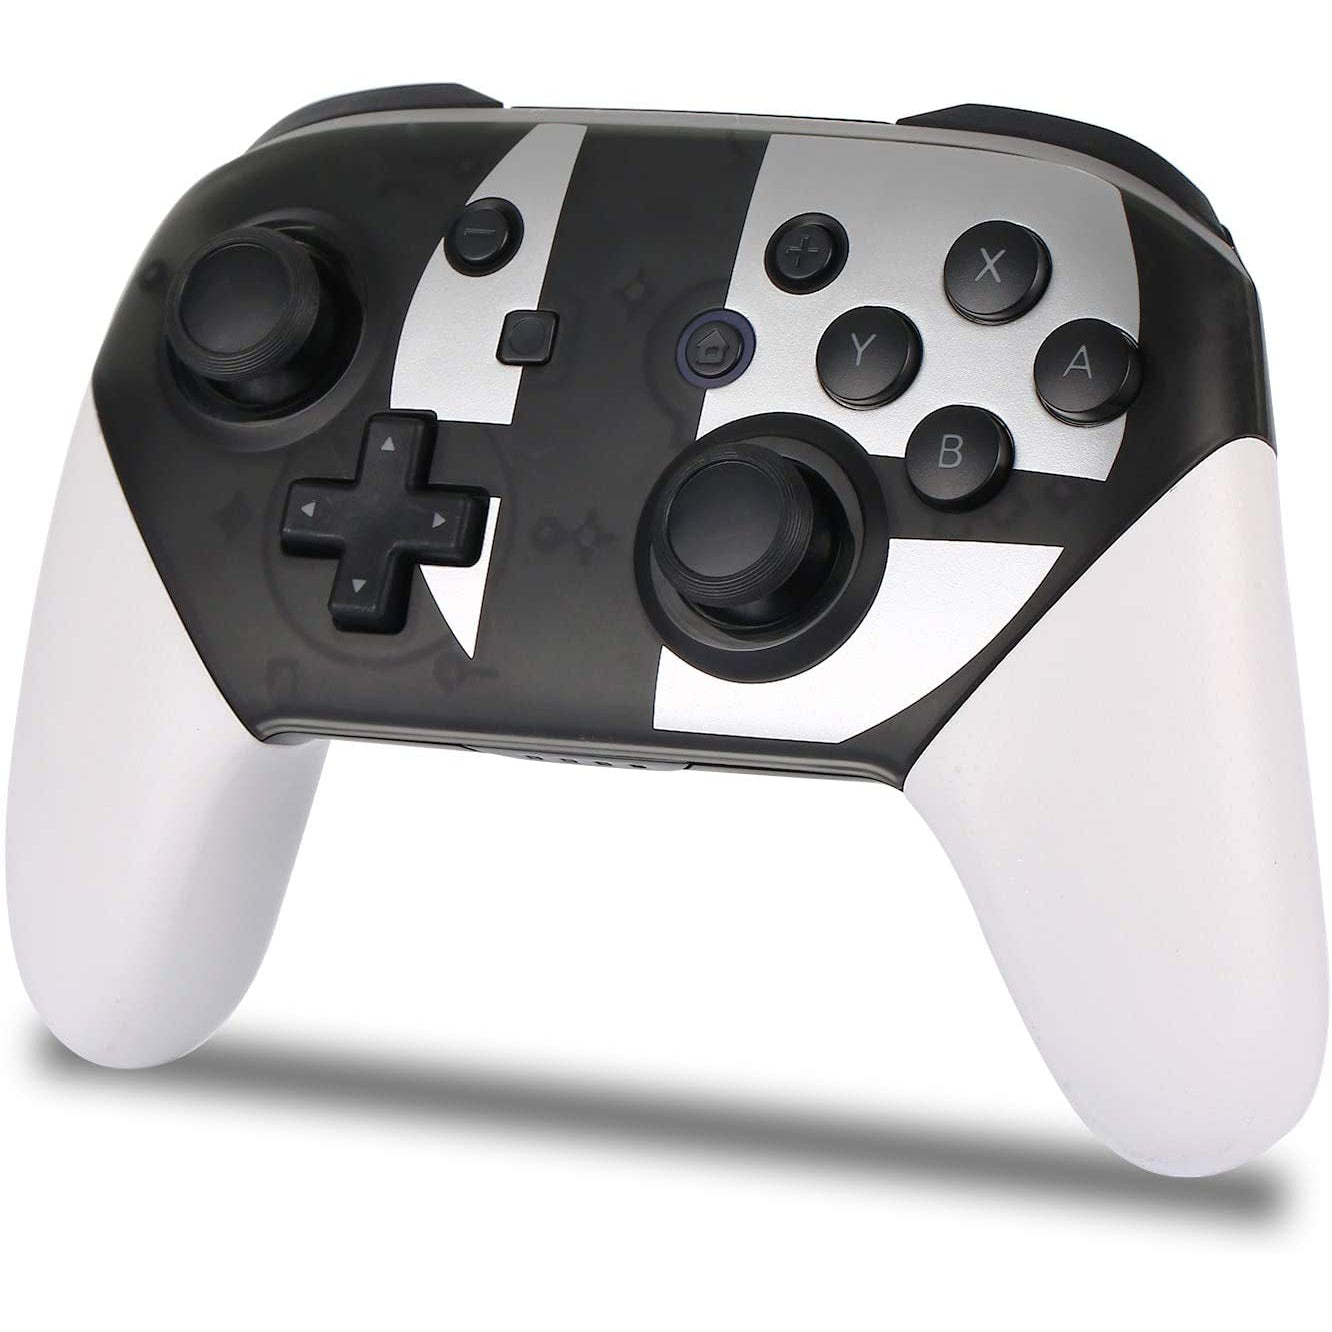 Pro Controller for Nintendo Switch - Black and White